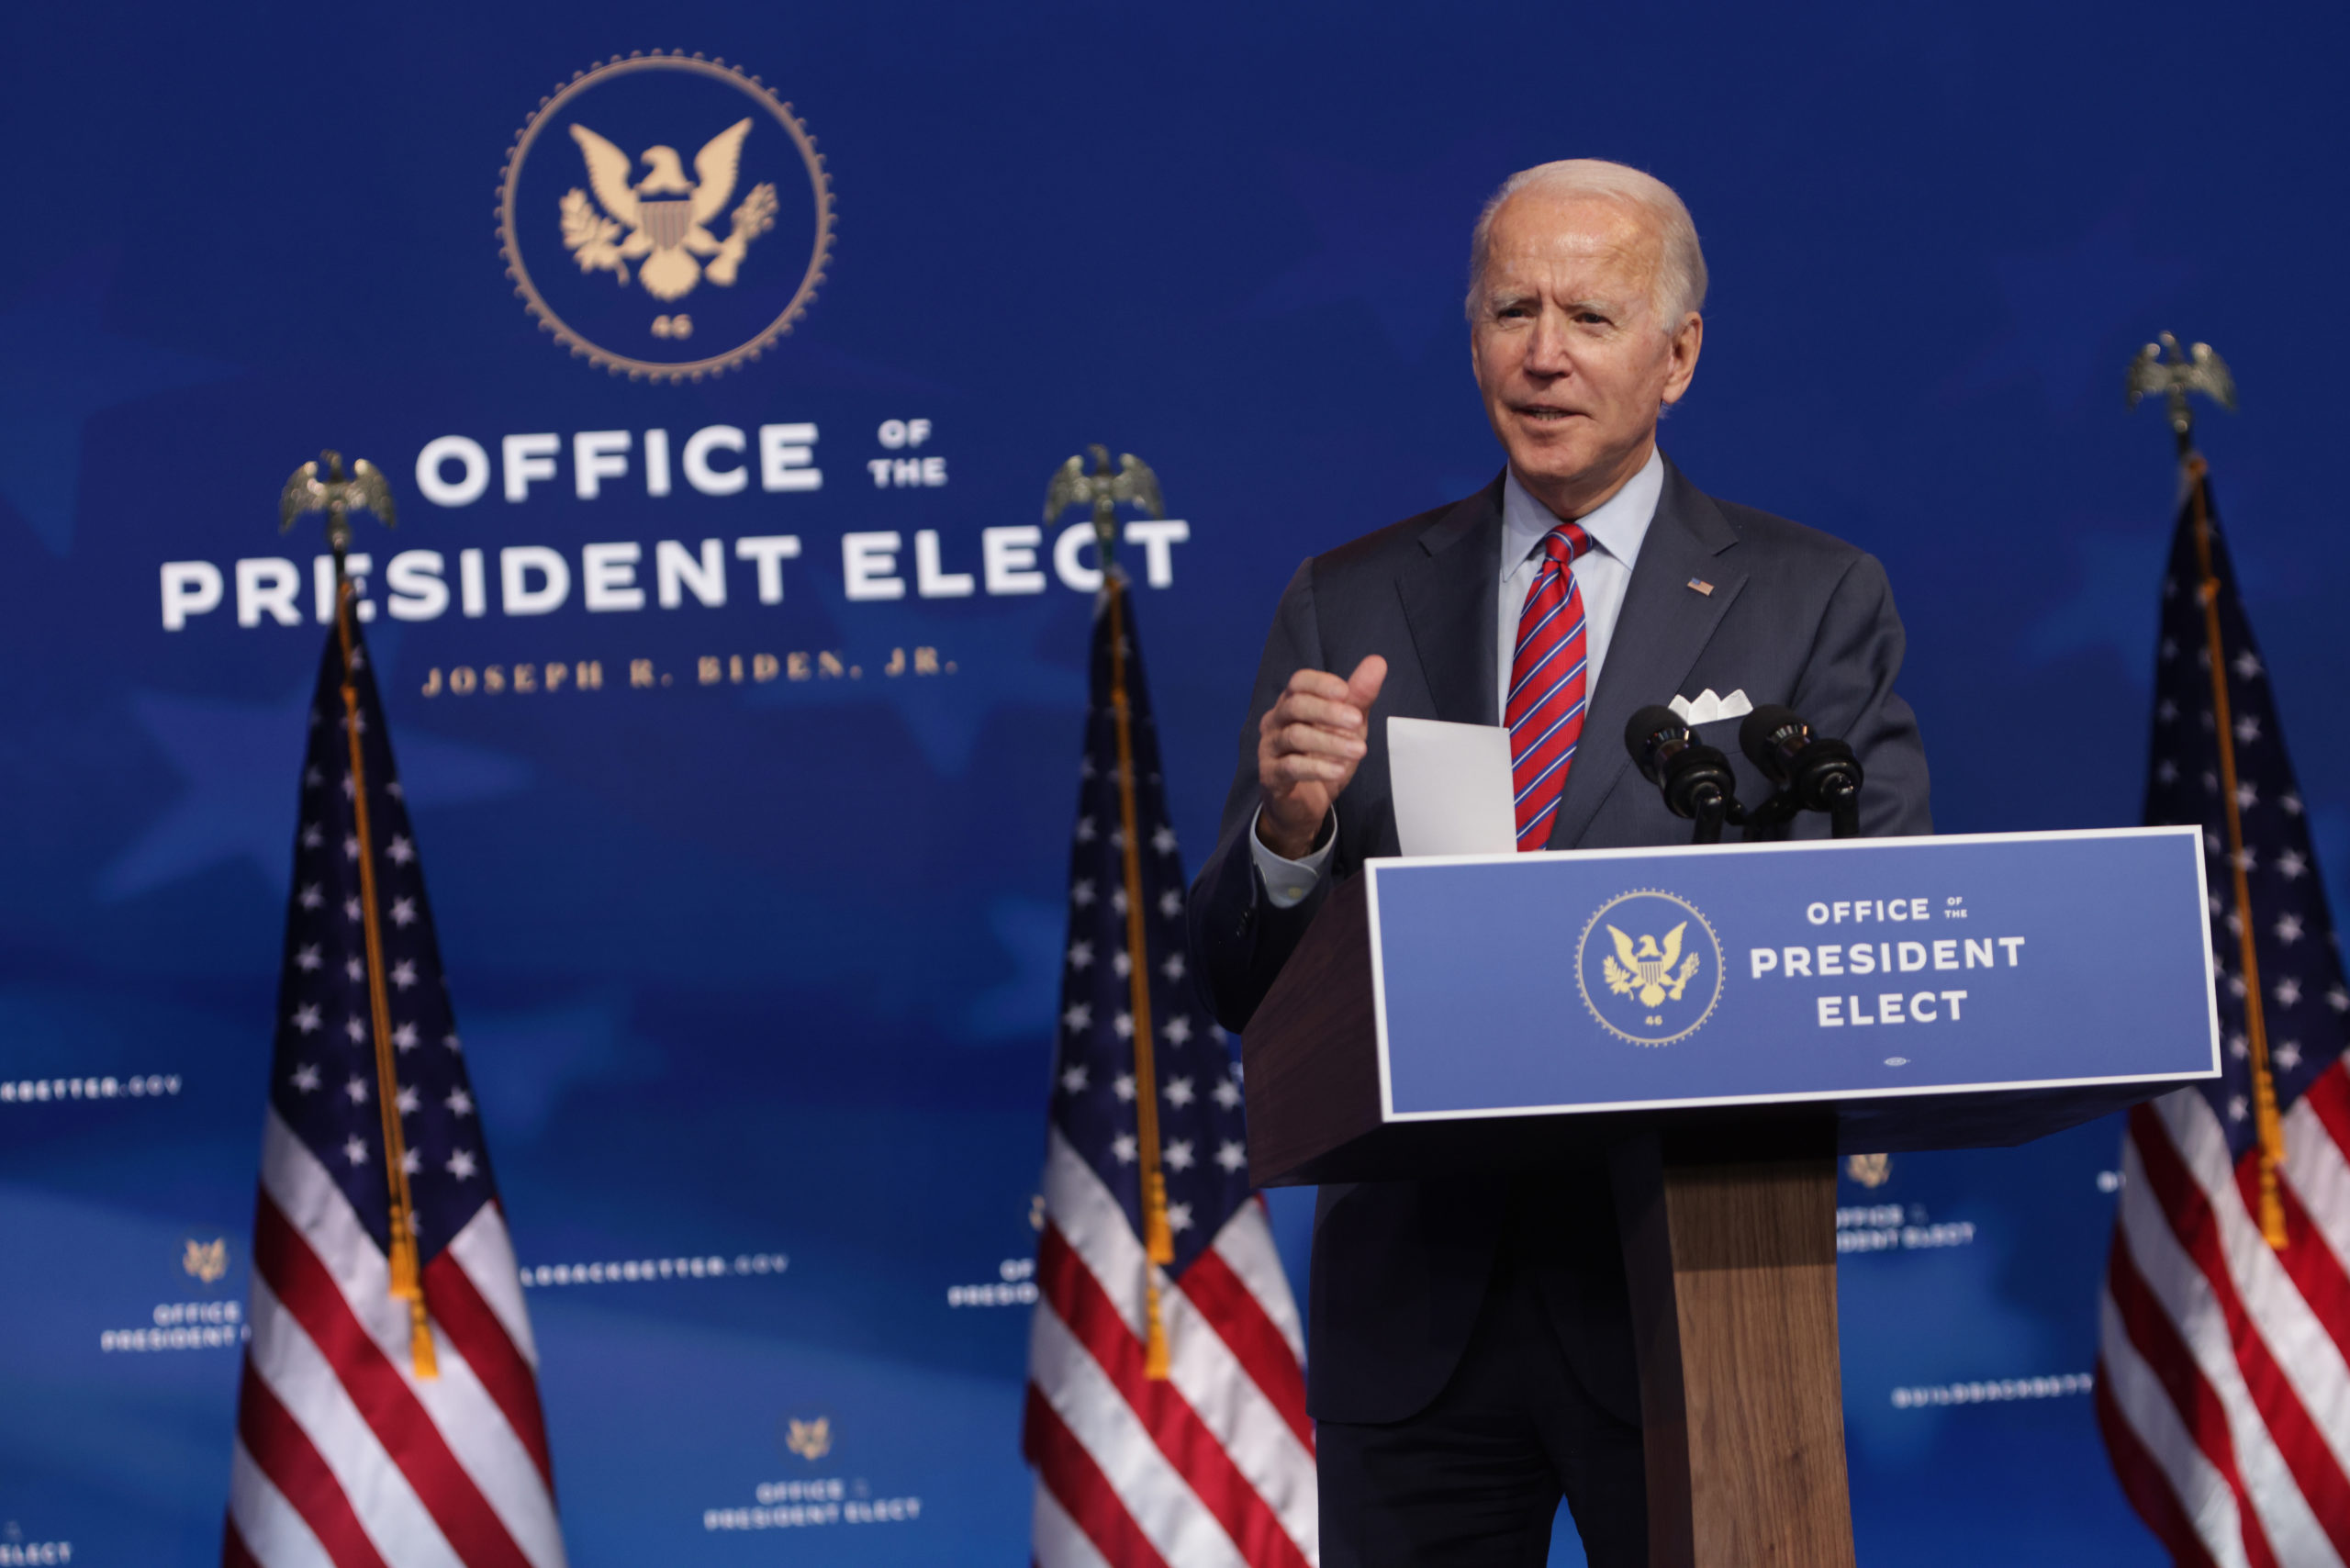 President-elect Joe Biden answers a question during a news conference inWilmington, Delaware on Friday. (Alex Wong/Getty Images)